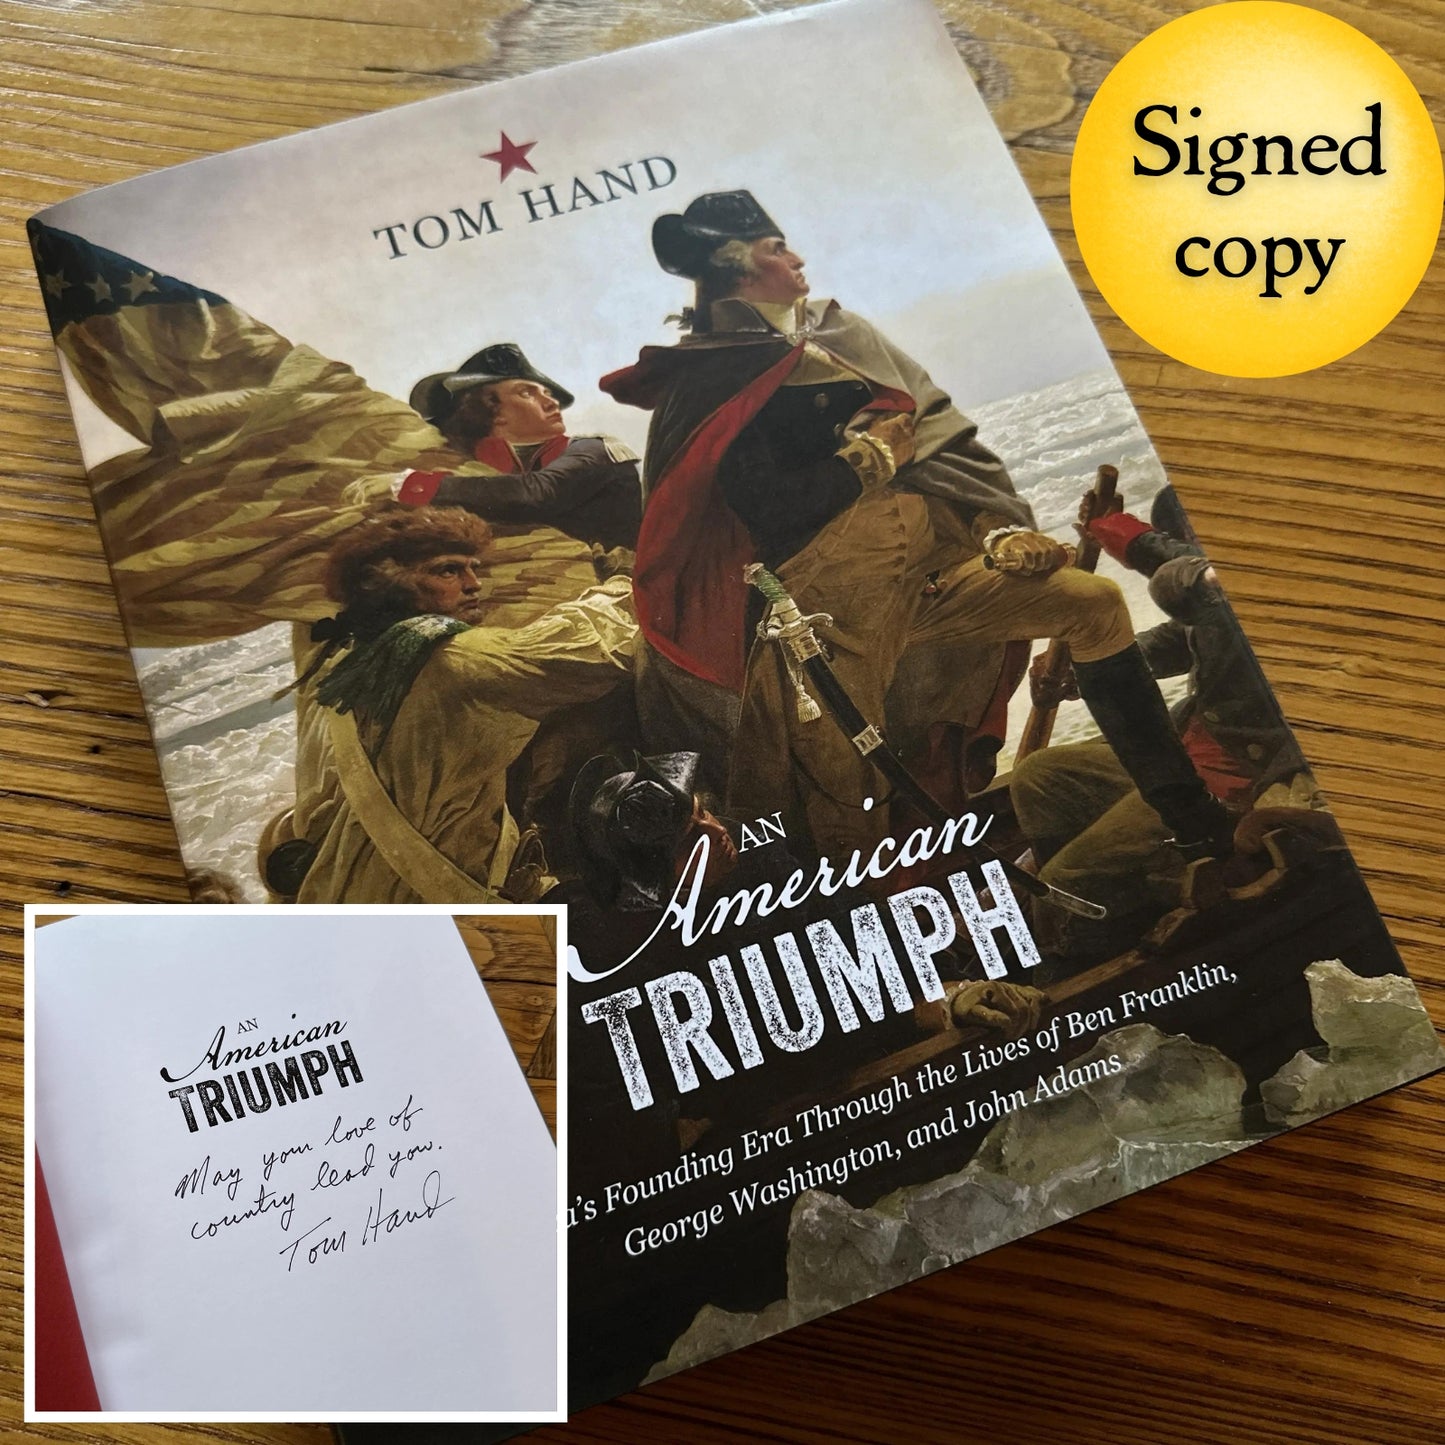 "An American Triumph: America’s Founding Era through the Lives of Ben Franklin, George Washington, and John Adams" - Signed by the author Tom Hand from The History List store